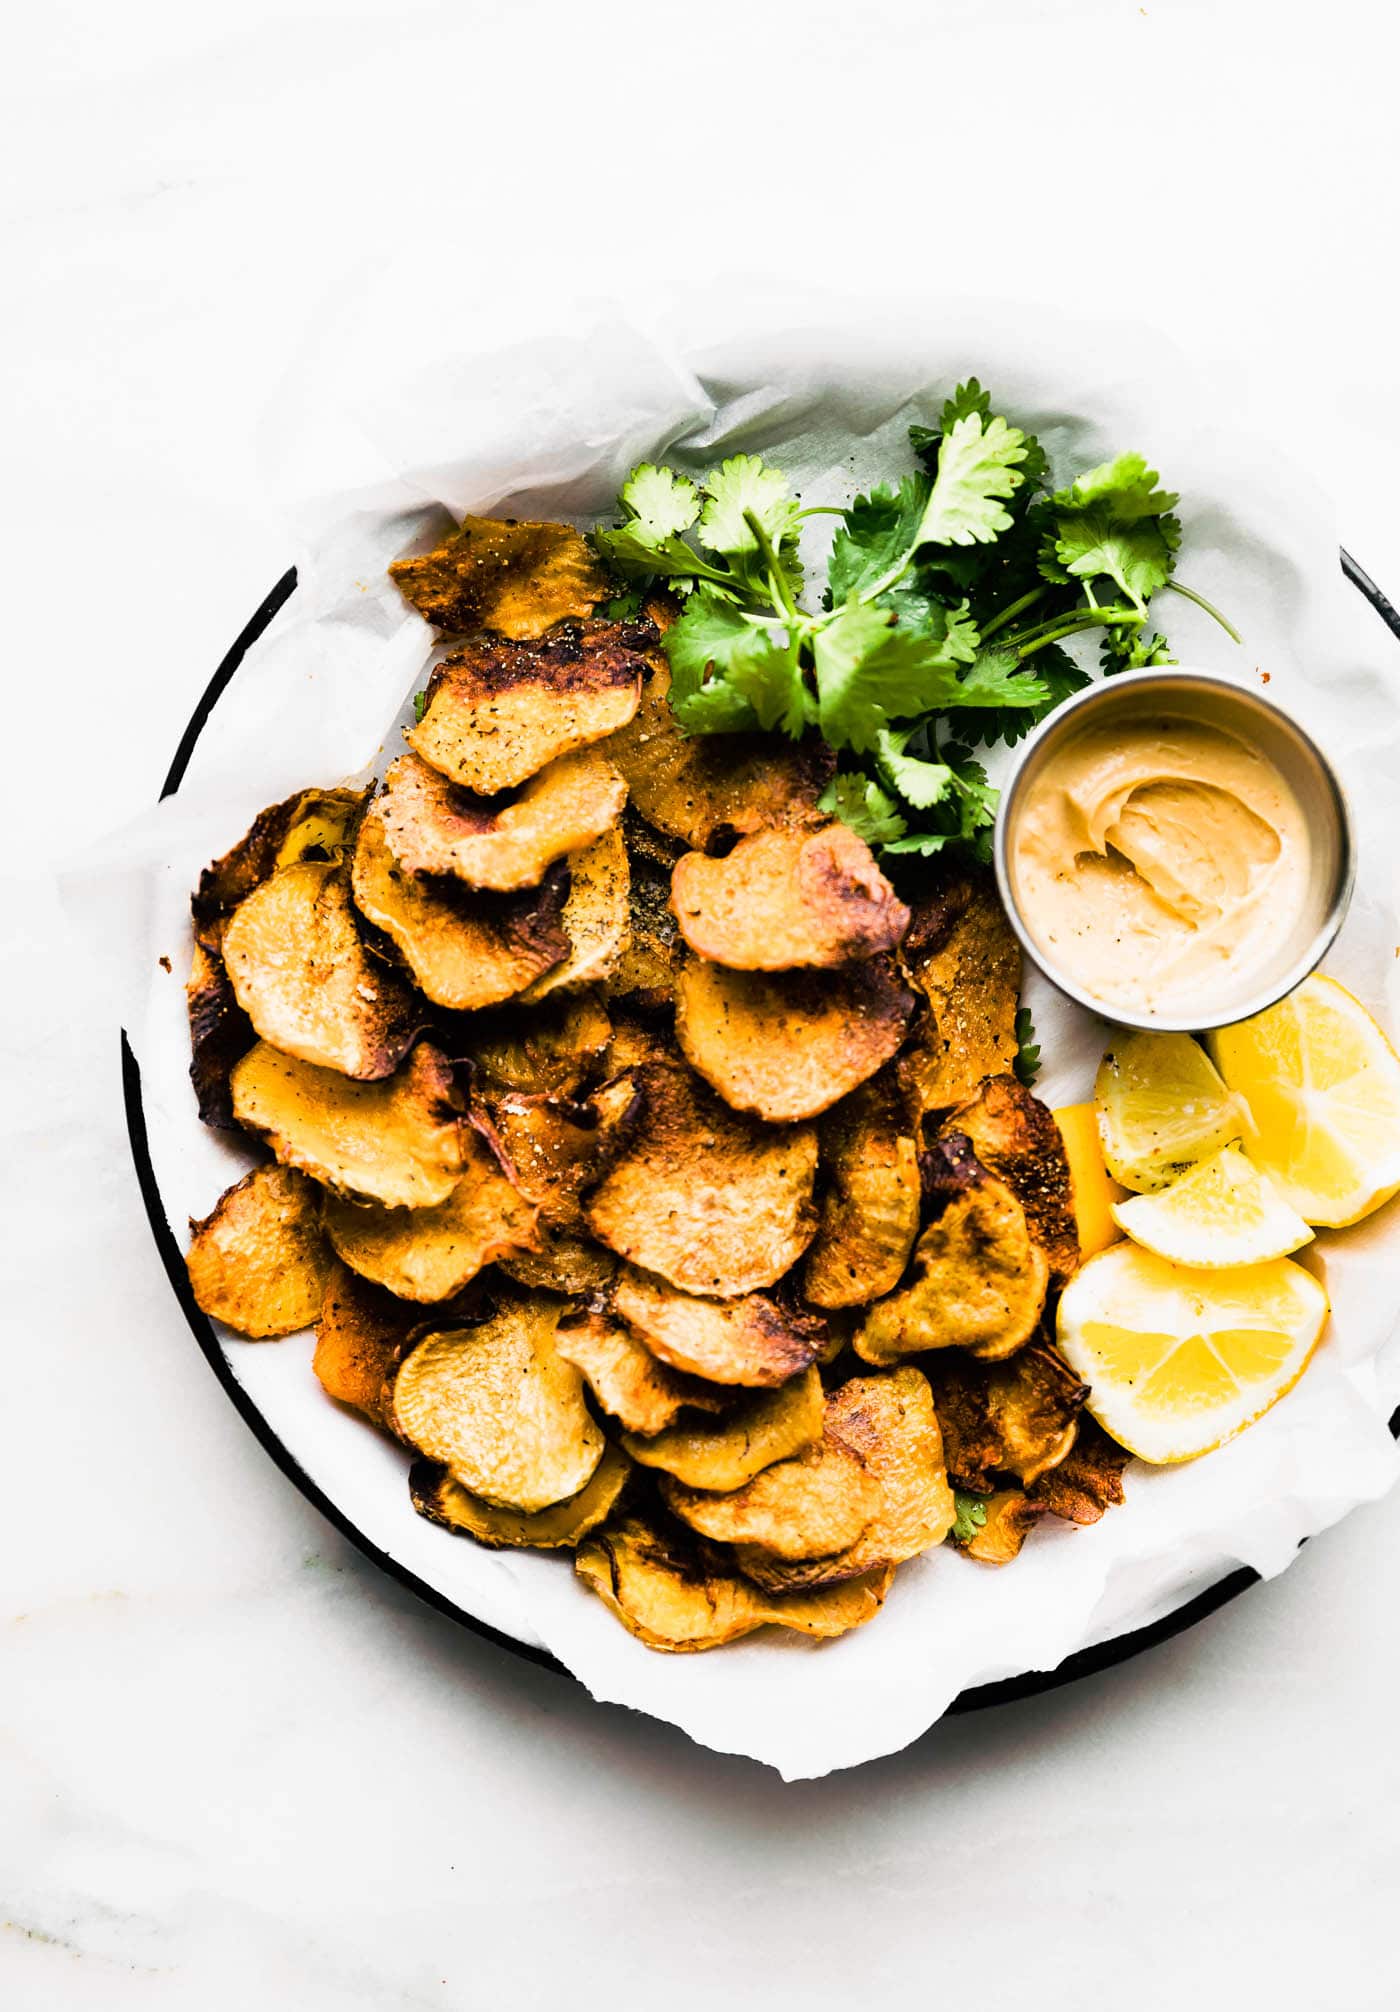 BBQ Baked Rutabaga Chips are a healthy and flavorful gluten free side dish, appetizer, or snack! Rutabaga is a root vegetable that’s easy to bake and cook with, so making the baked chips recipe is easy, too! Super tasty, budget friendly, kid friendly, and naturally paleo/vegan. EAT UP!